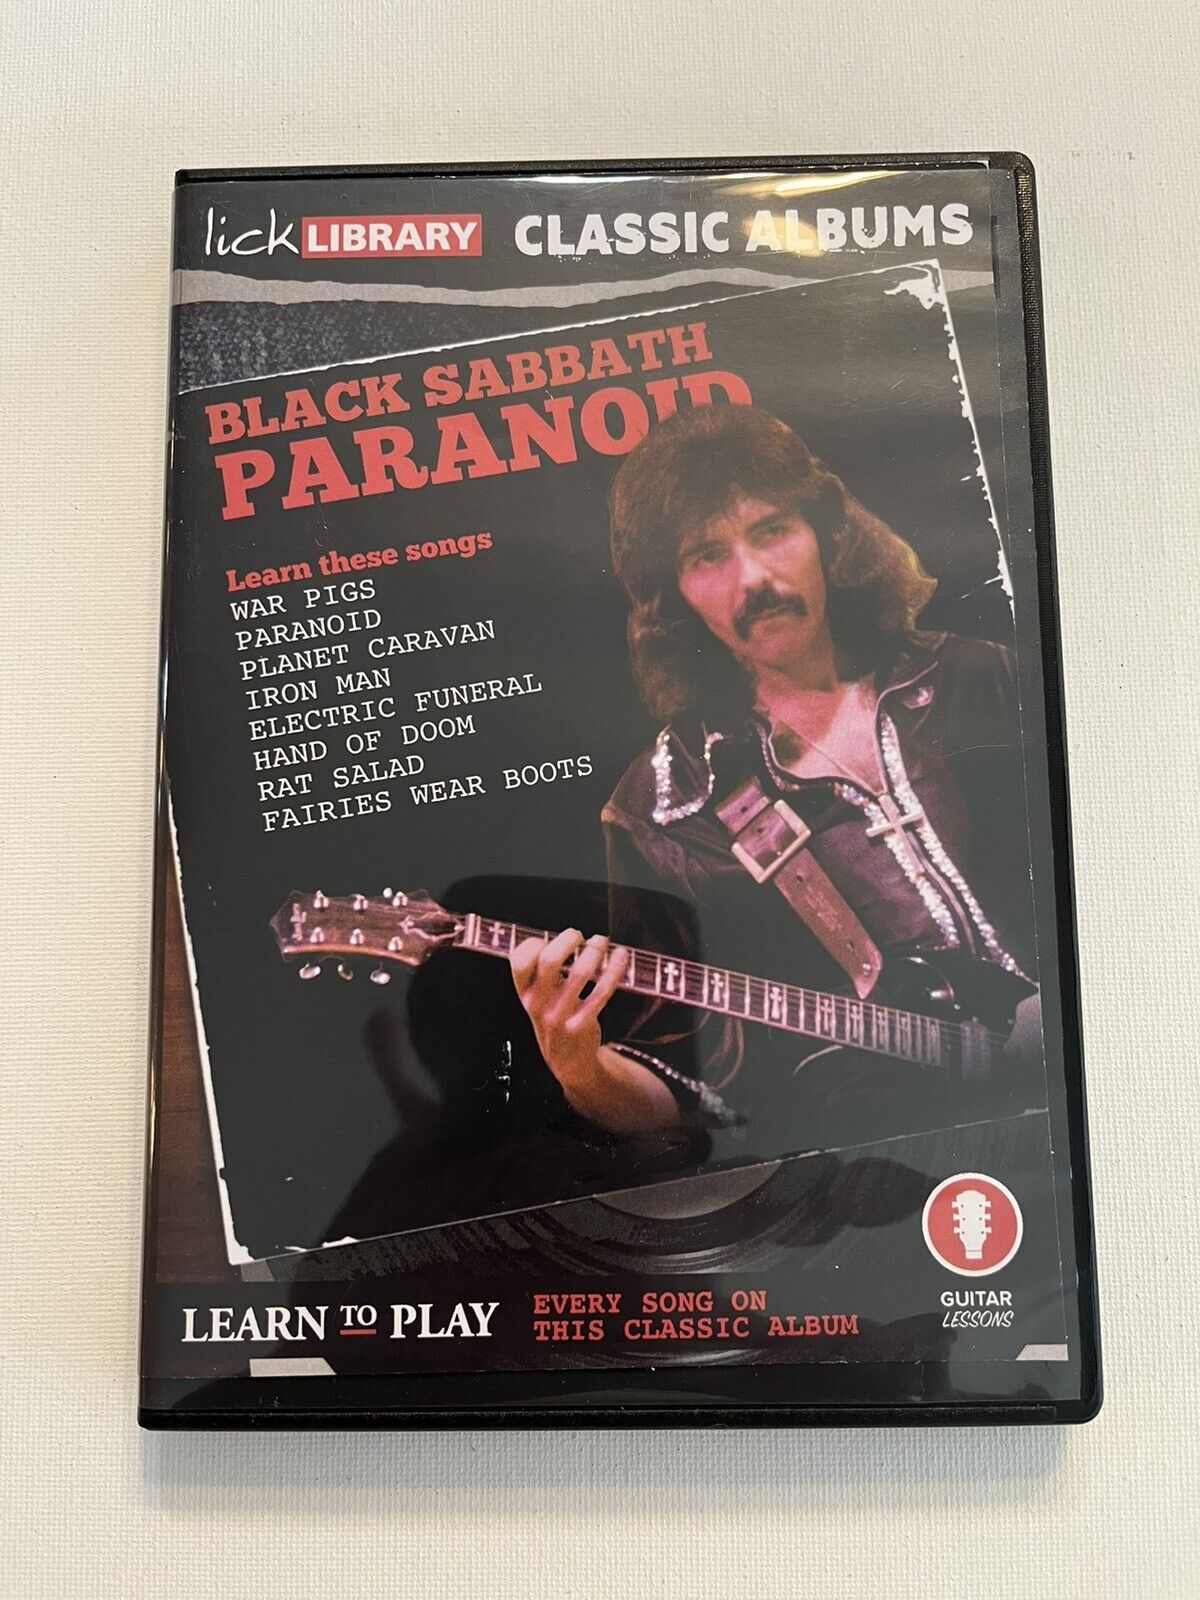 LICK LIBRARY Learn to Play BLACK SABBATH PARANOID CLASSIC ALBUMS Guitar DVD ROCK